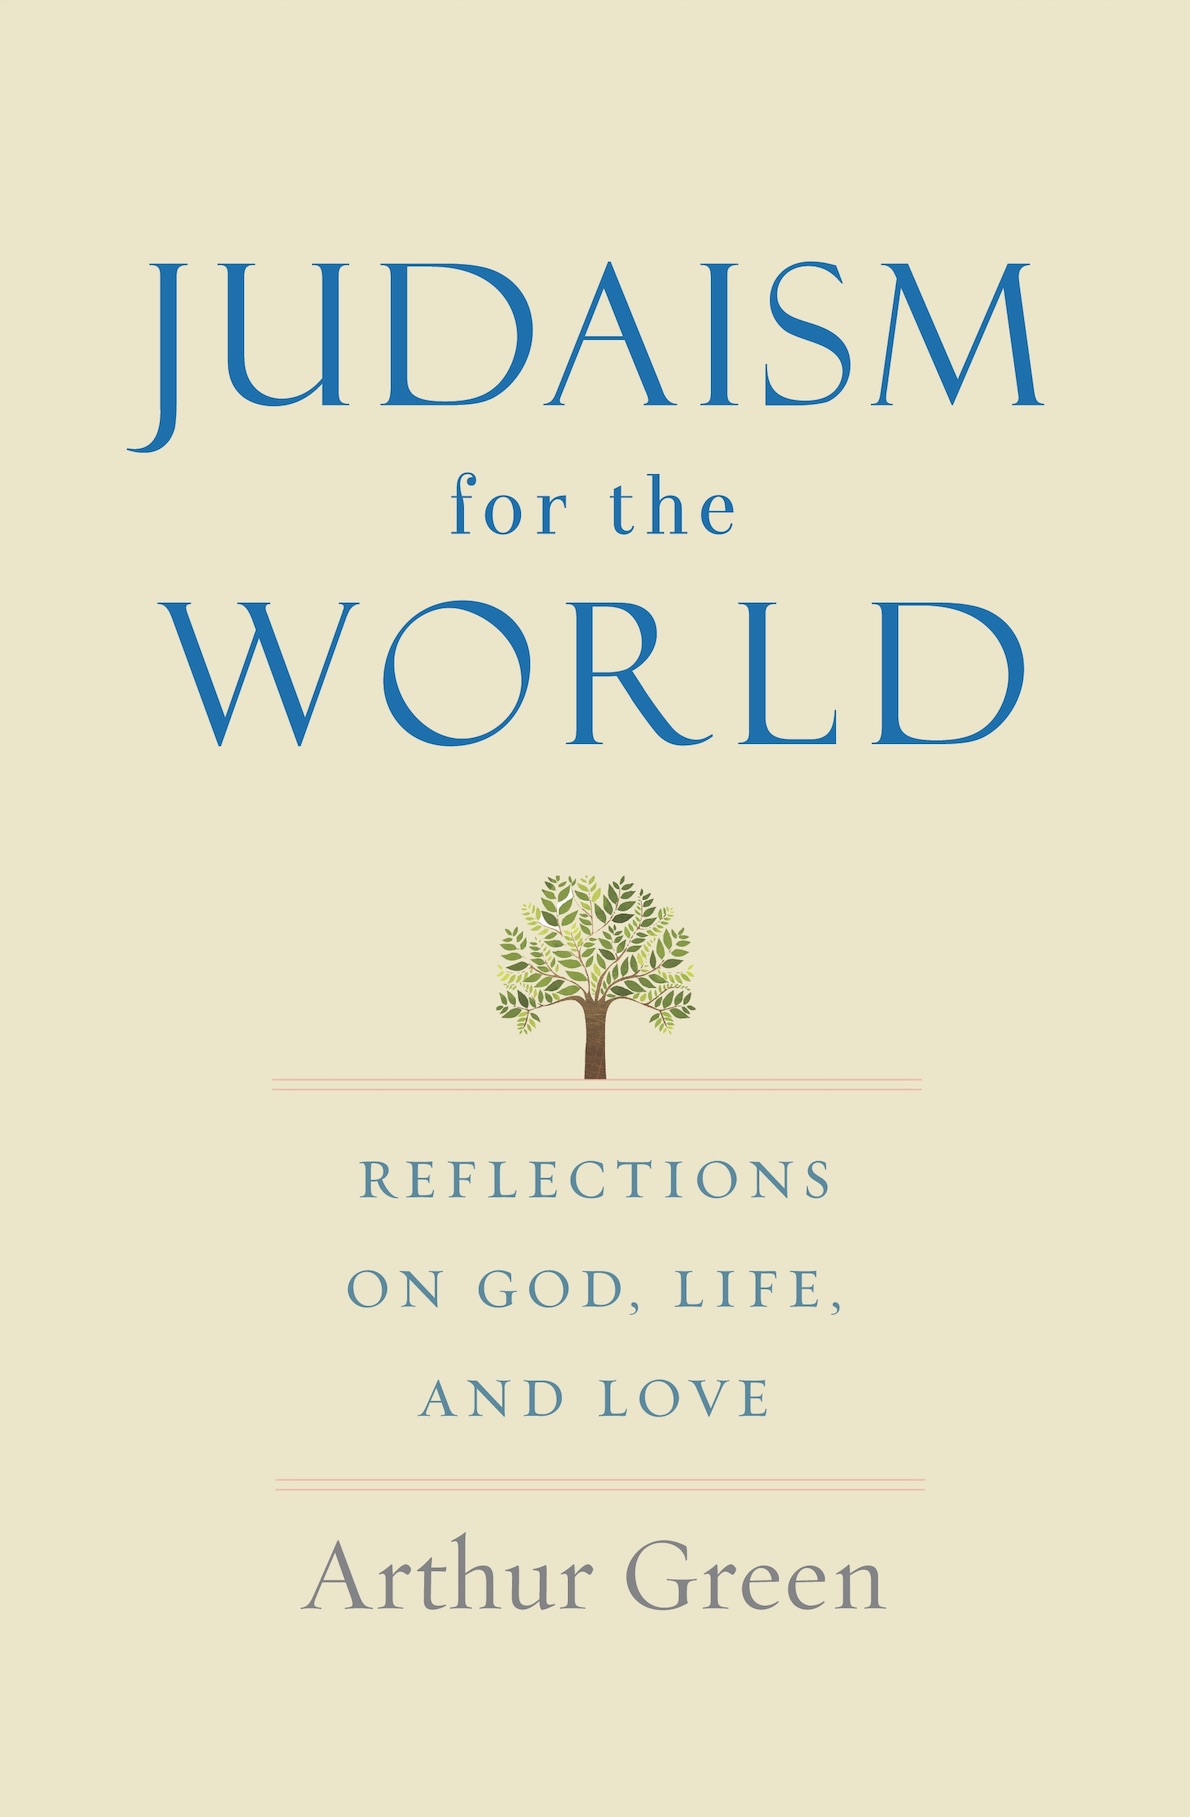 Judaism for the World